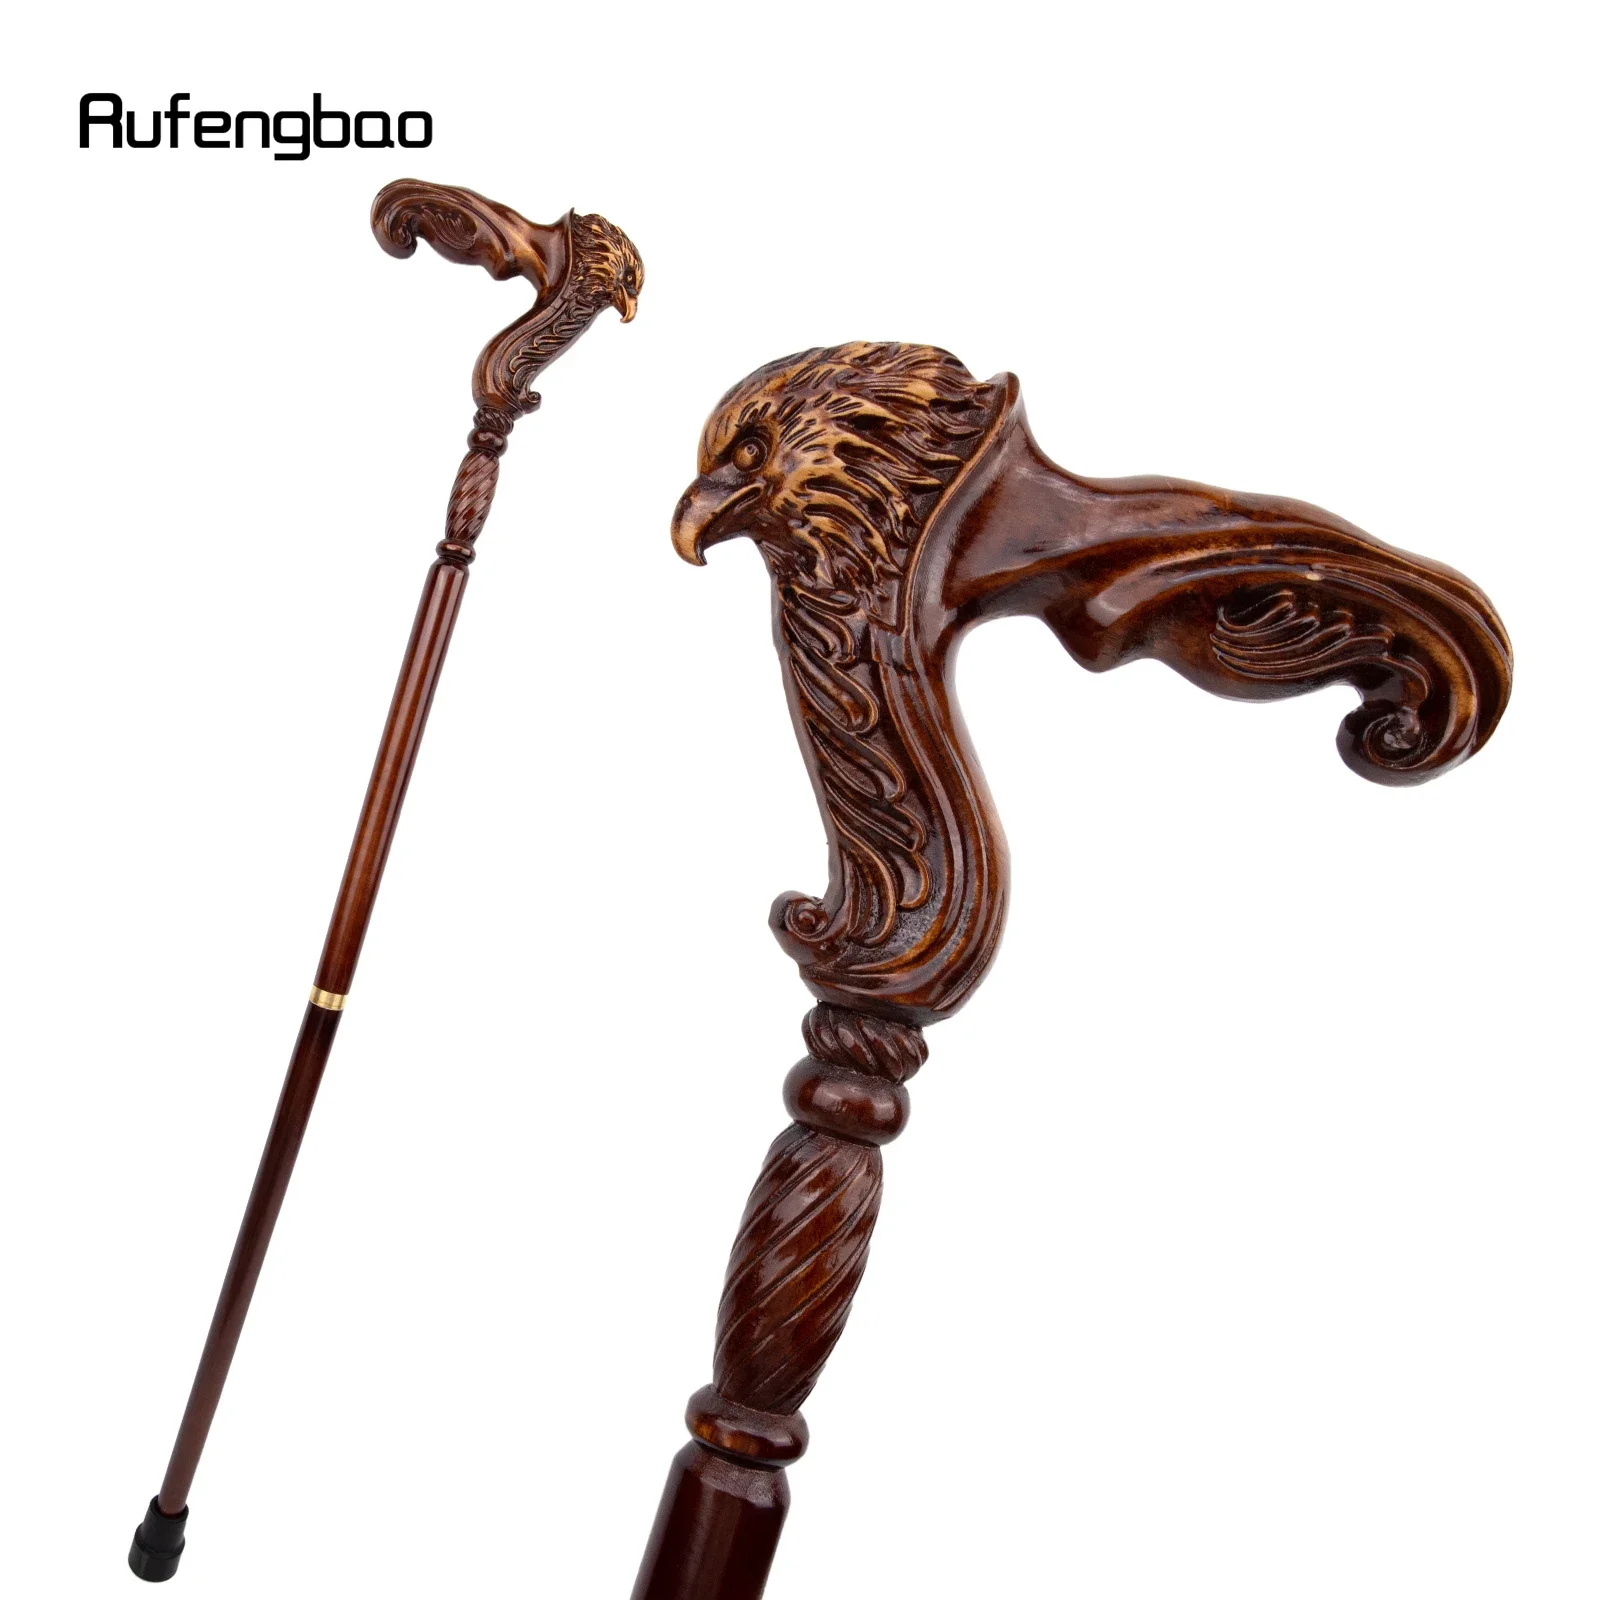 

Eagle Brown Wooden Fashion Walking Stick Decorative Vampire Cospaly Party Wood Walking Cane Halloween Mace Wand Crosier 93cm